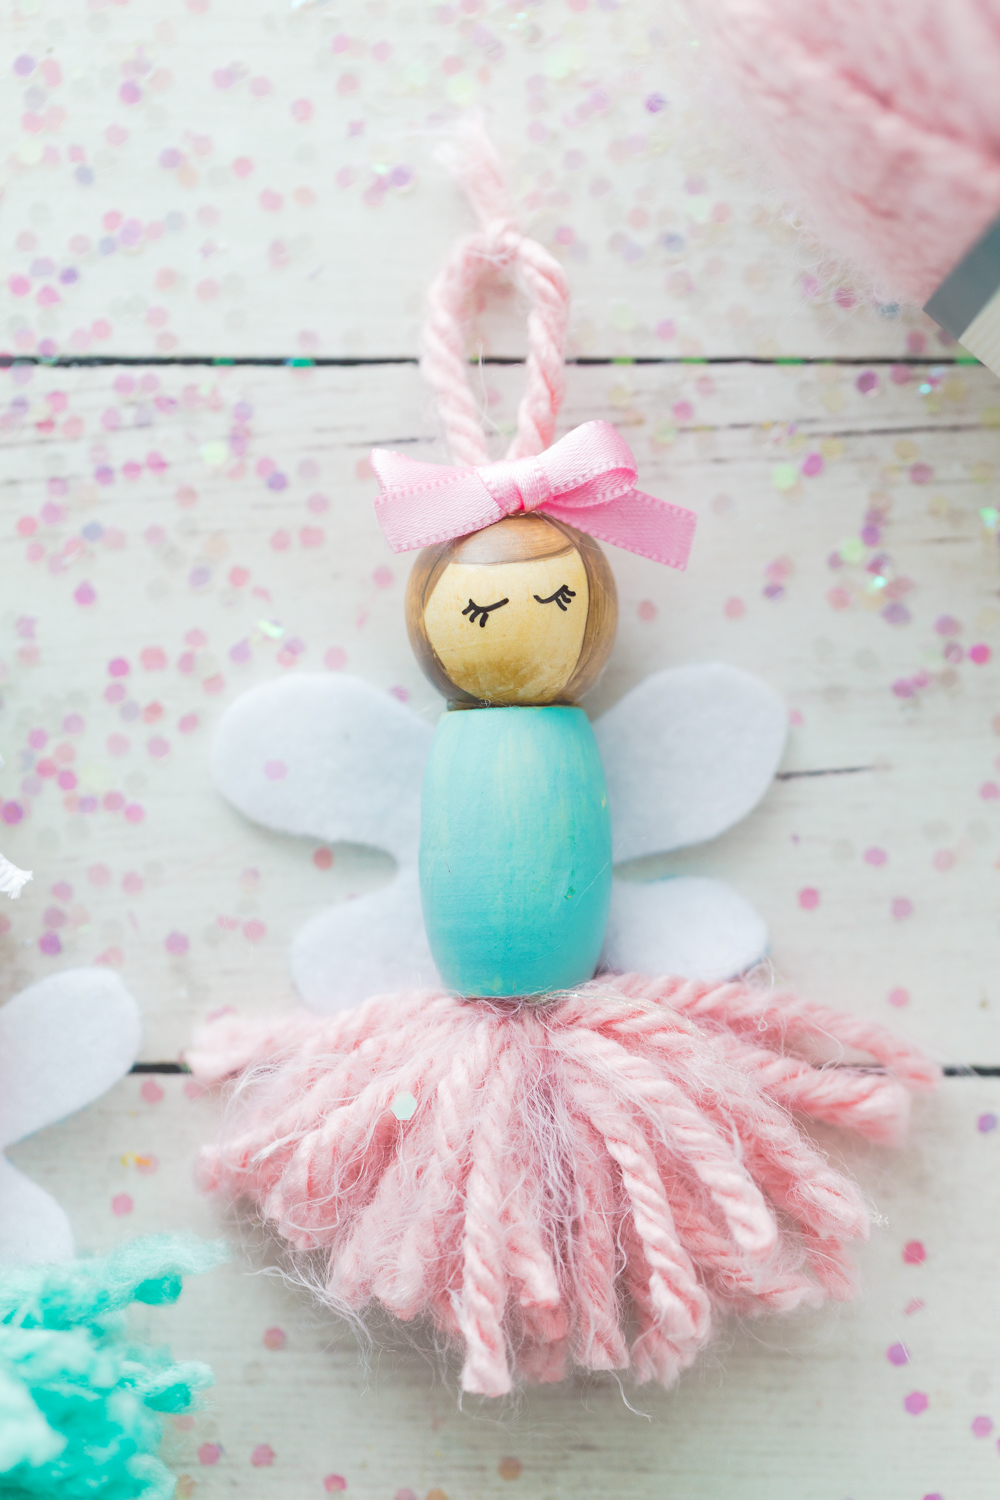 These Pom Pom Ballerina Fairies are the sweetest project for any little girl! They make great little bookshelf decorations or ornaments. 